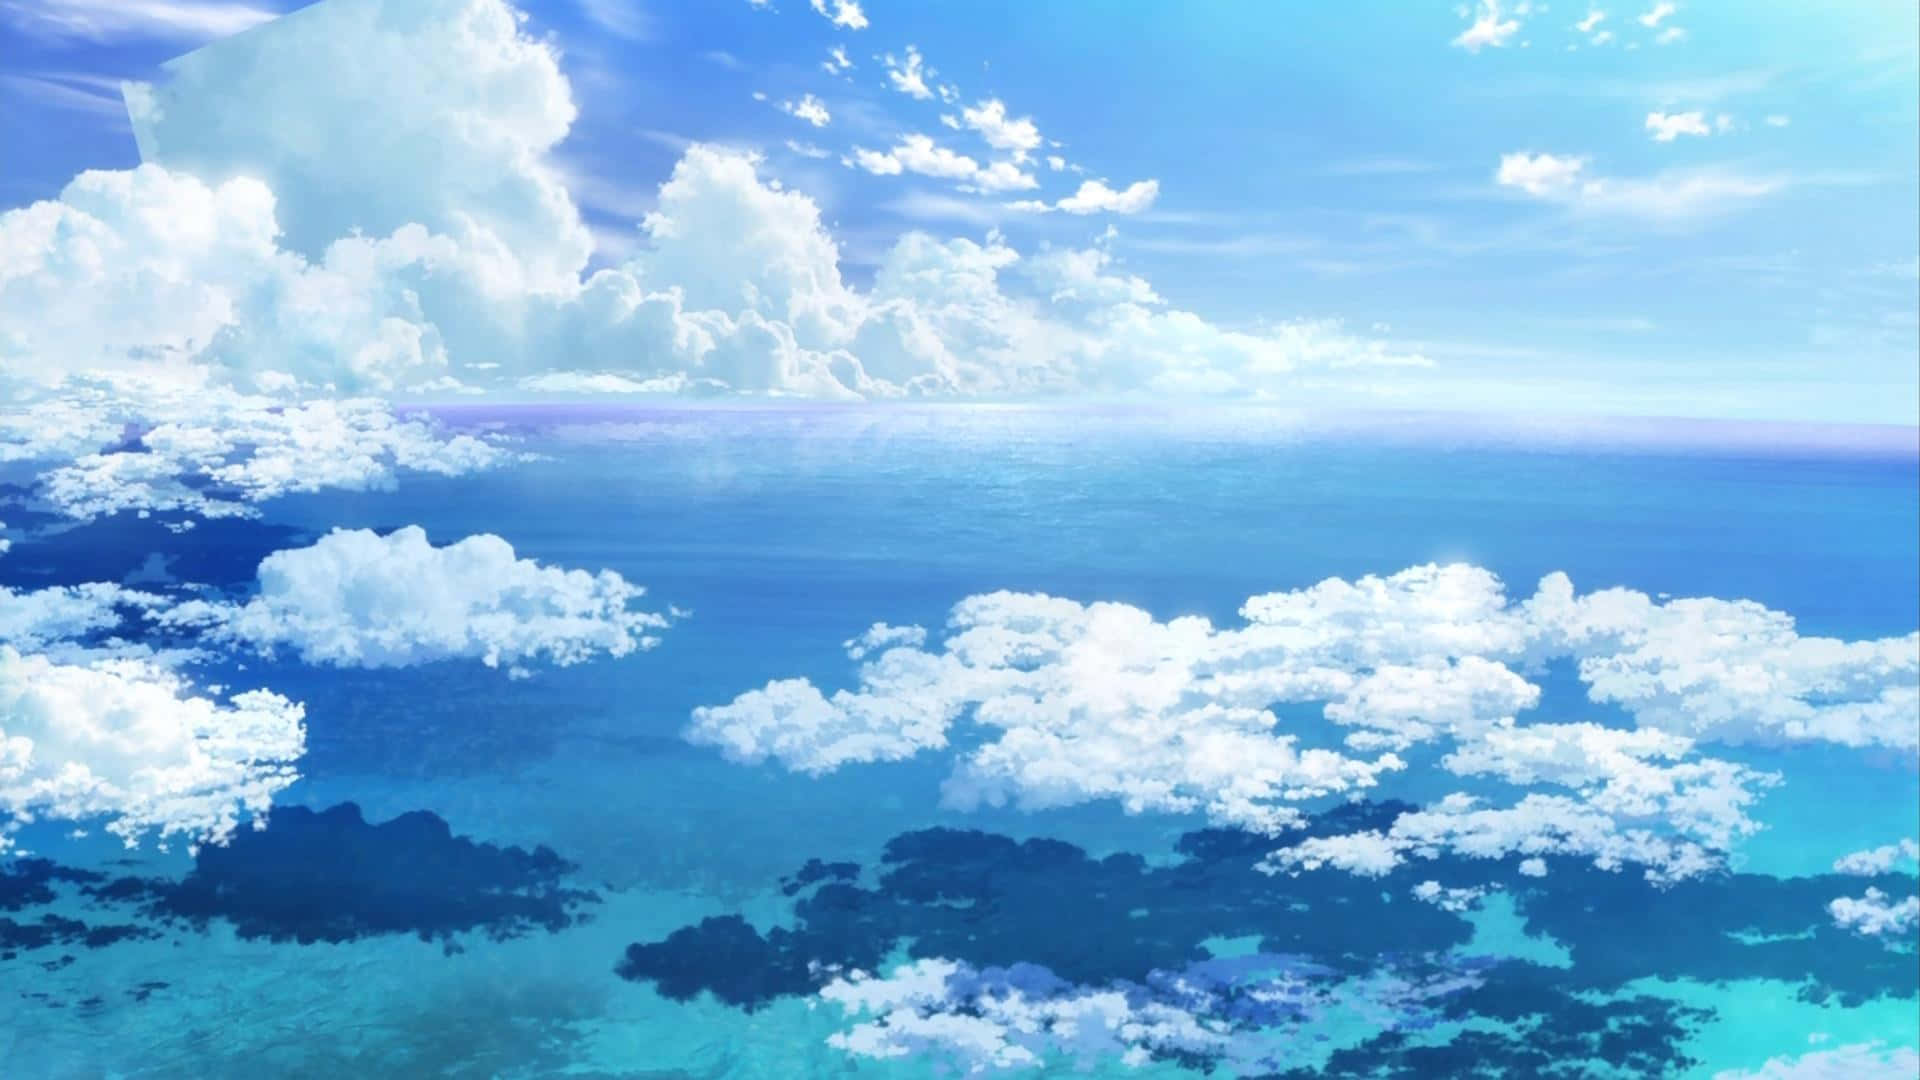 Anime Sky And Ocean Background